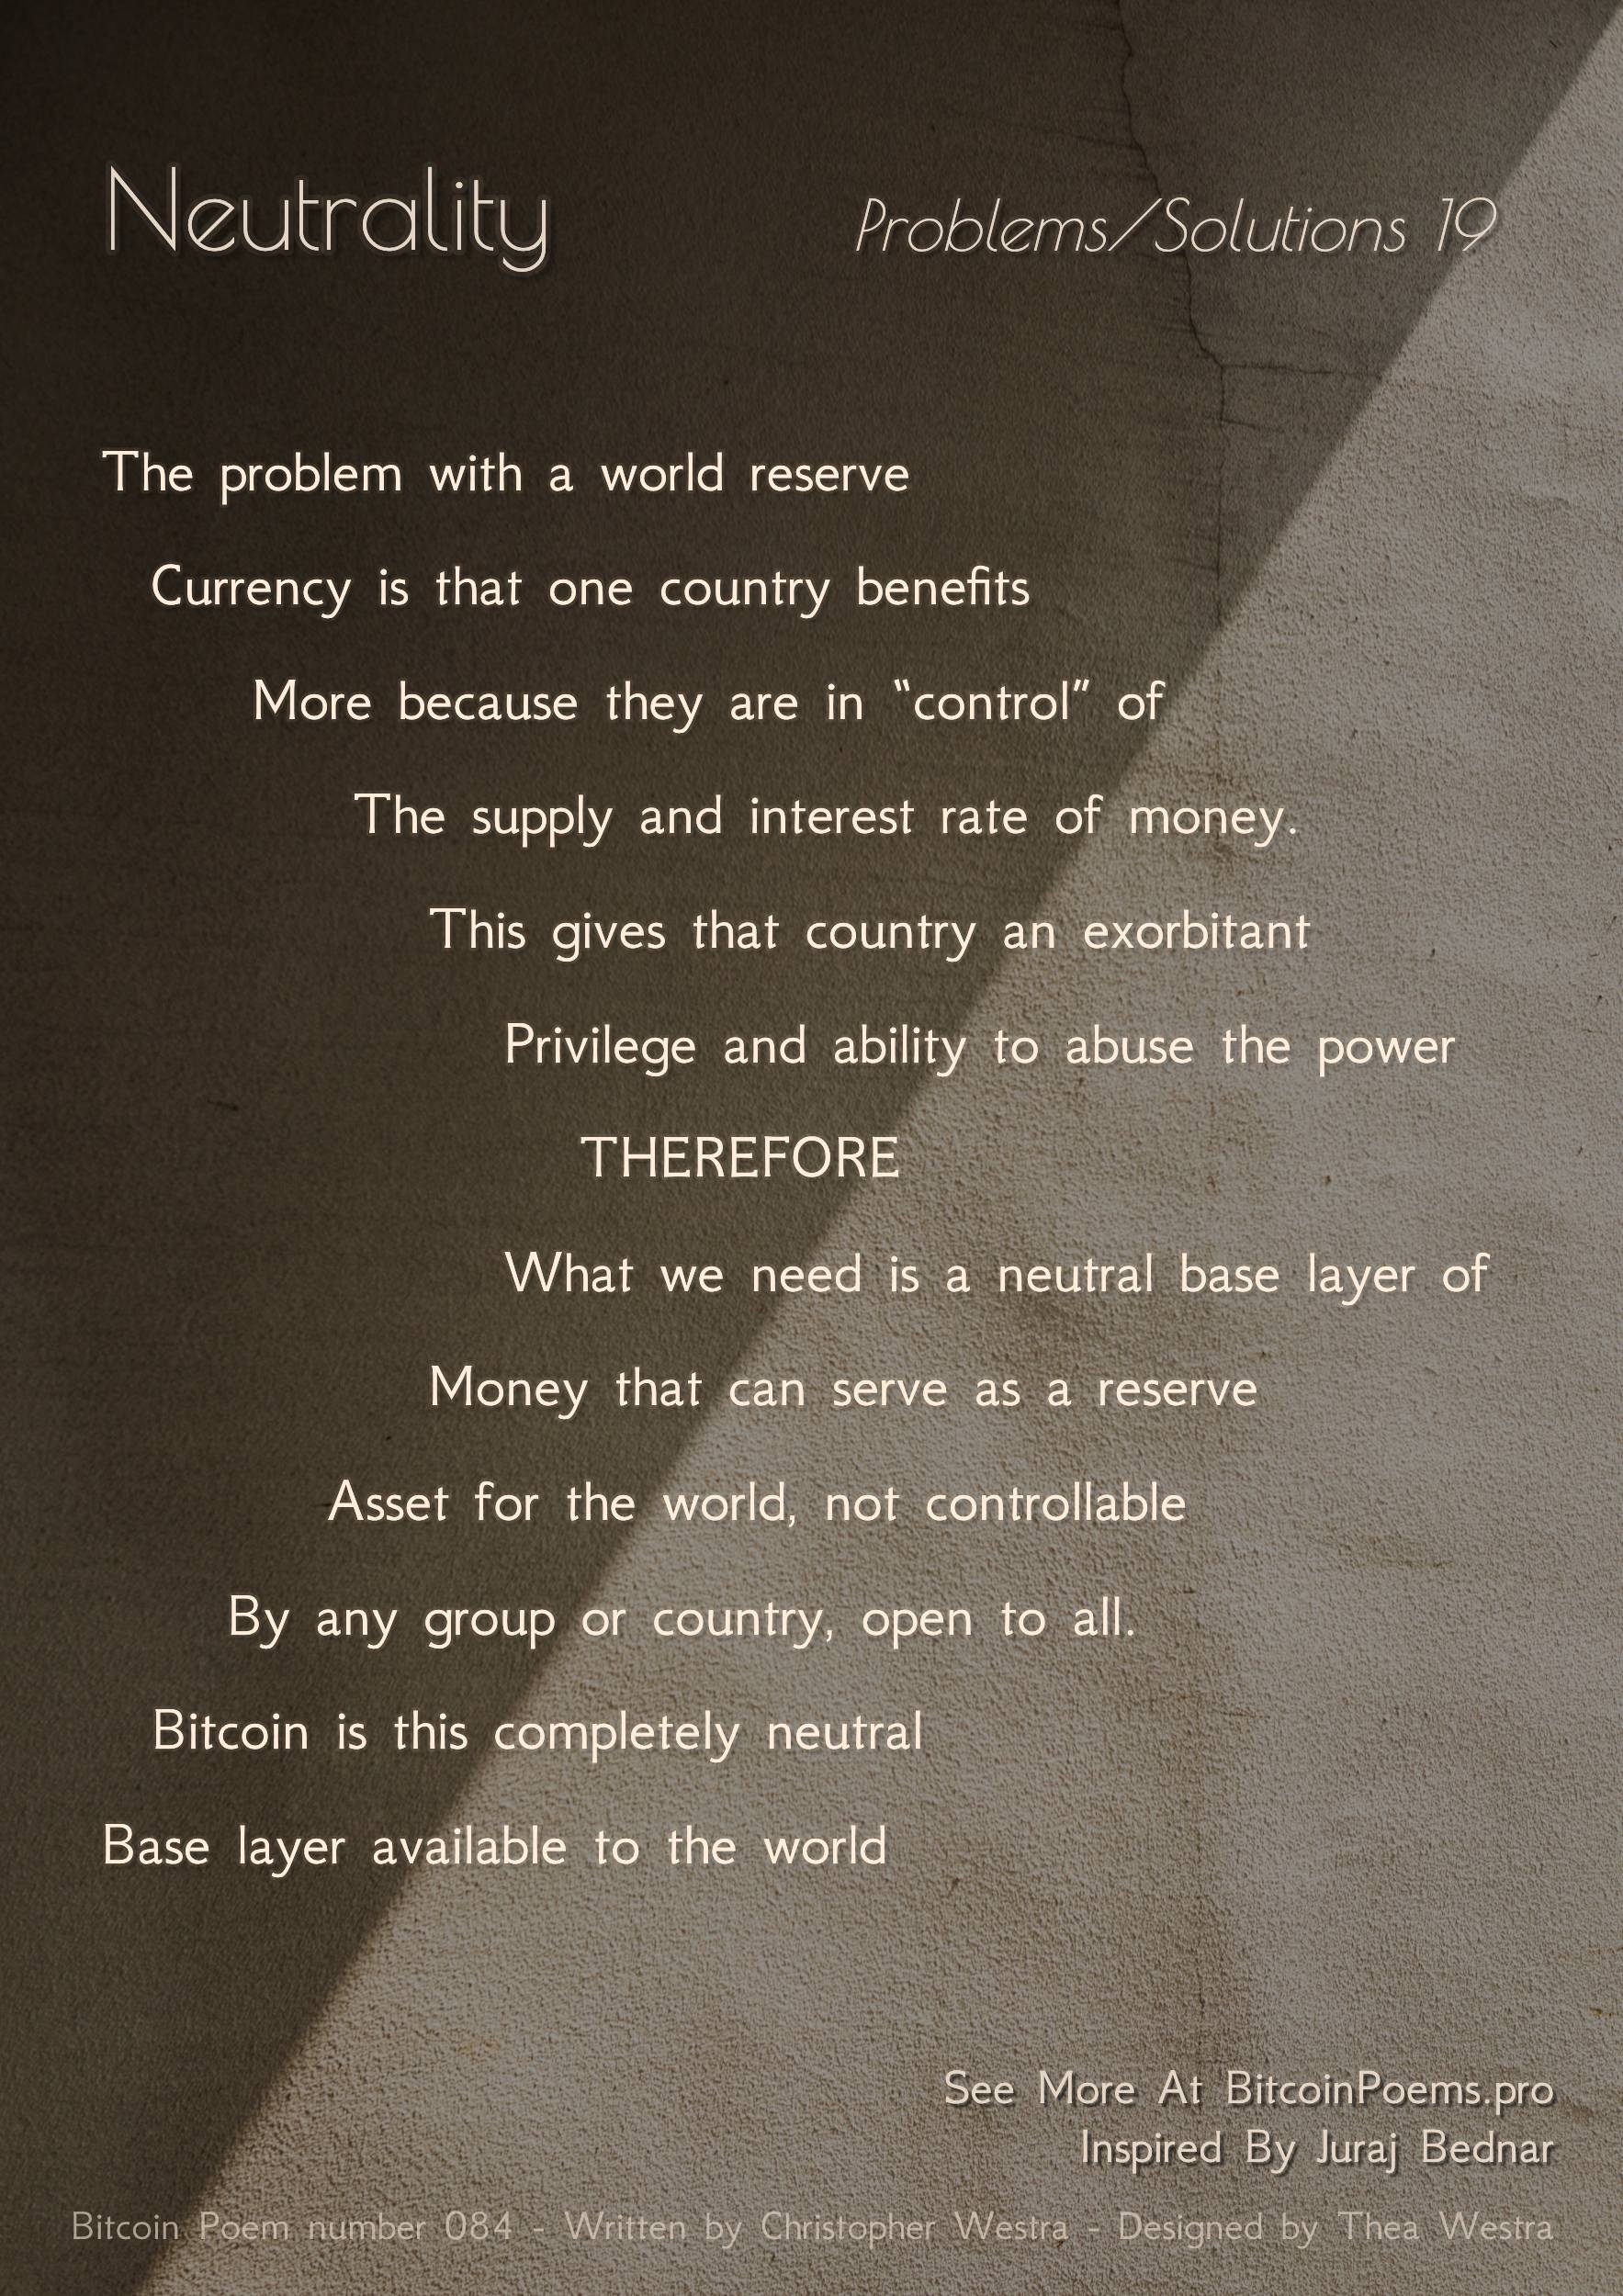 Neutrality (Problems/Solutions 19) - Bitcoin Poem 084 by Christopher Westra